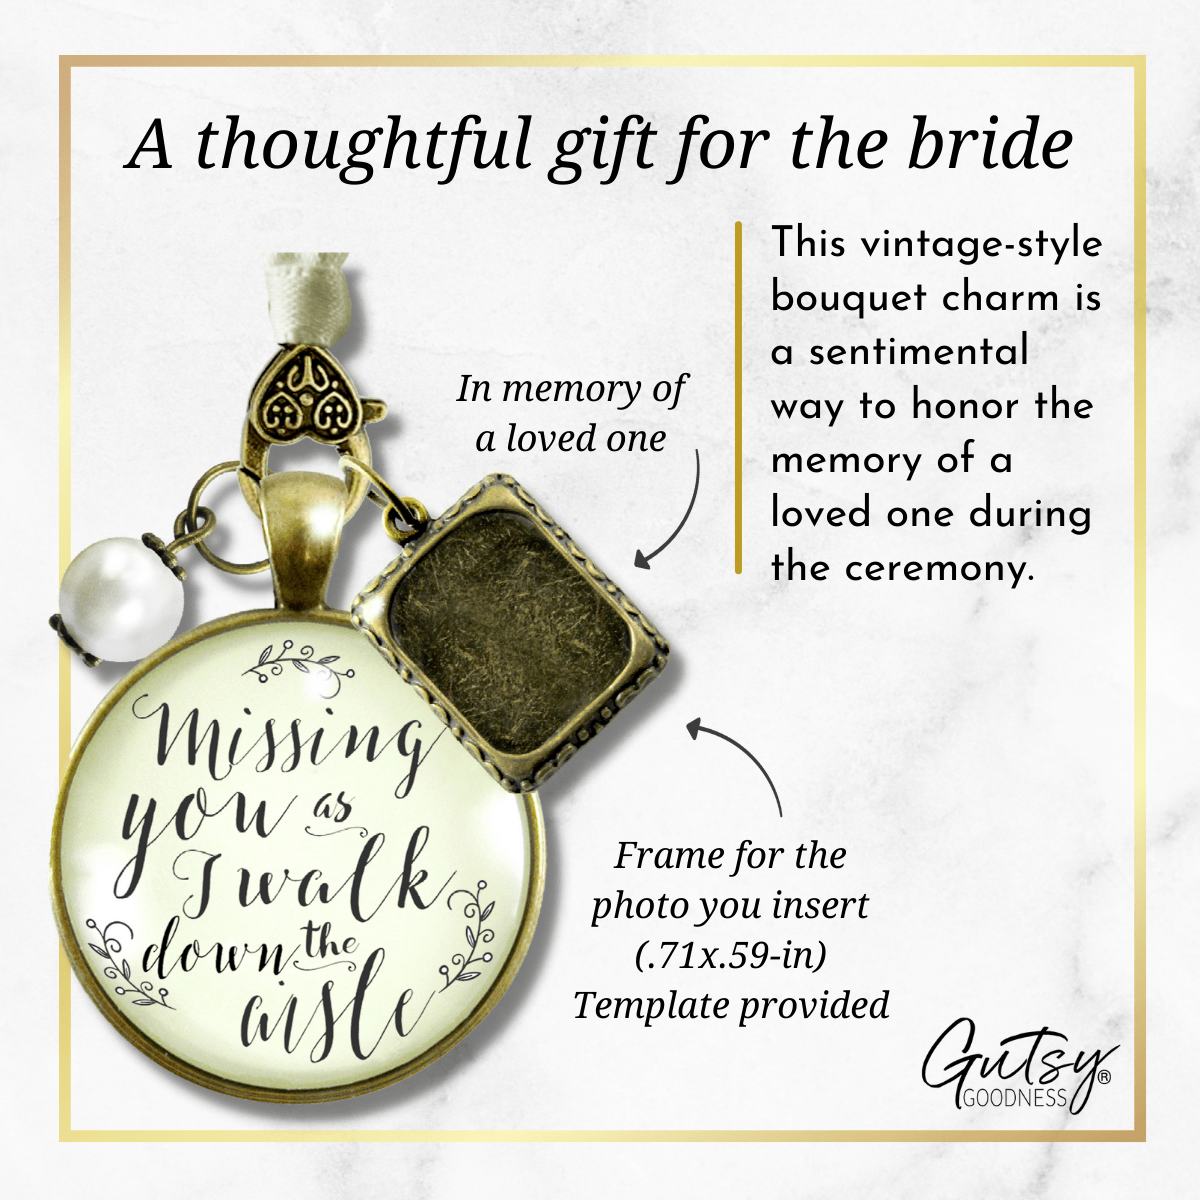 Missing You As I Walk Down Aisle Wedding Bouquet Memory Charm Memorial Photo Jewels - Gutsy Goodness Handmade Jewelry Gifts